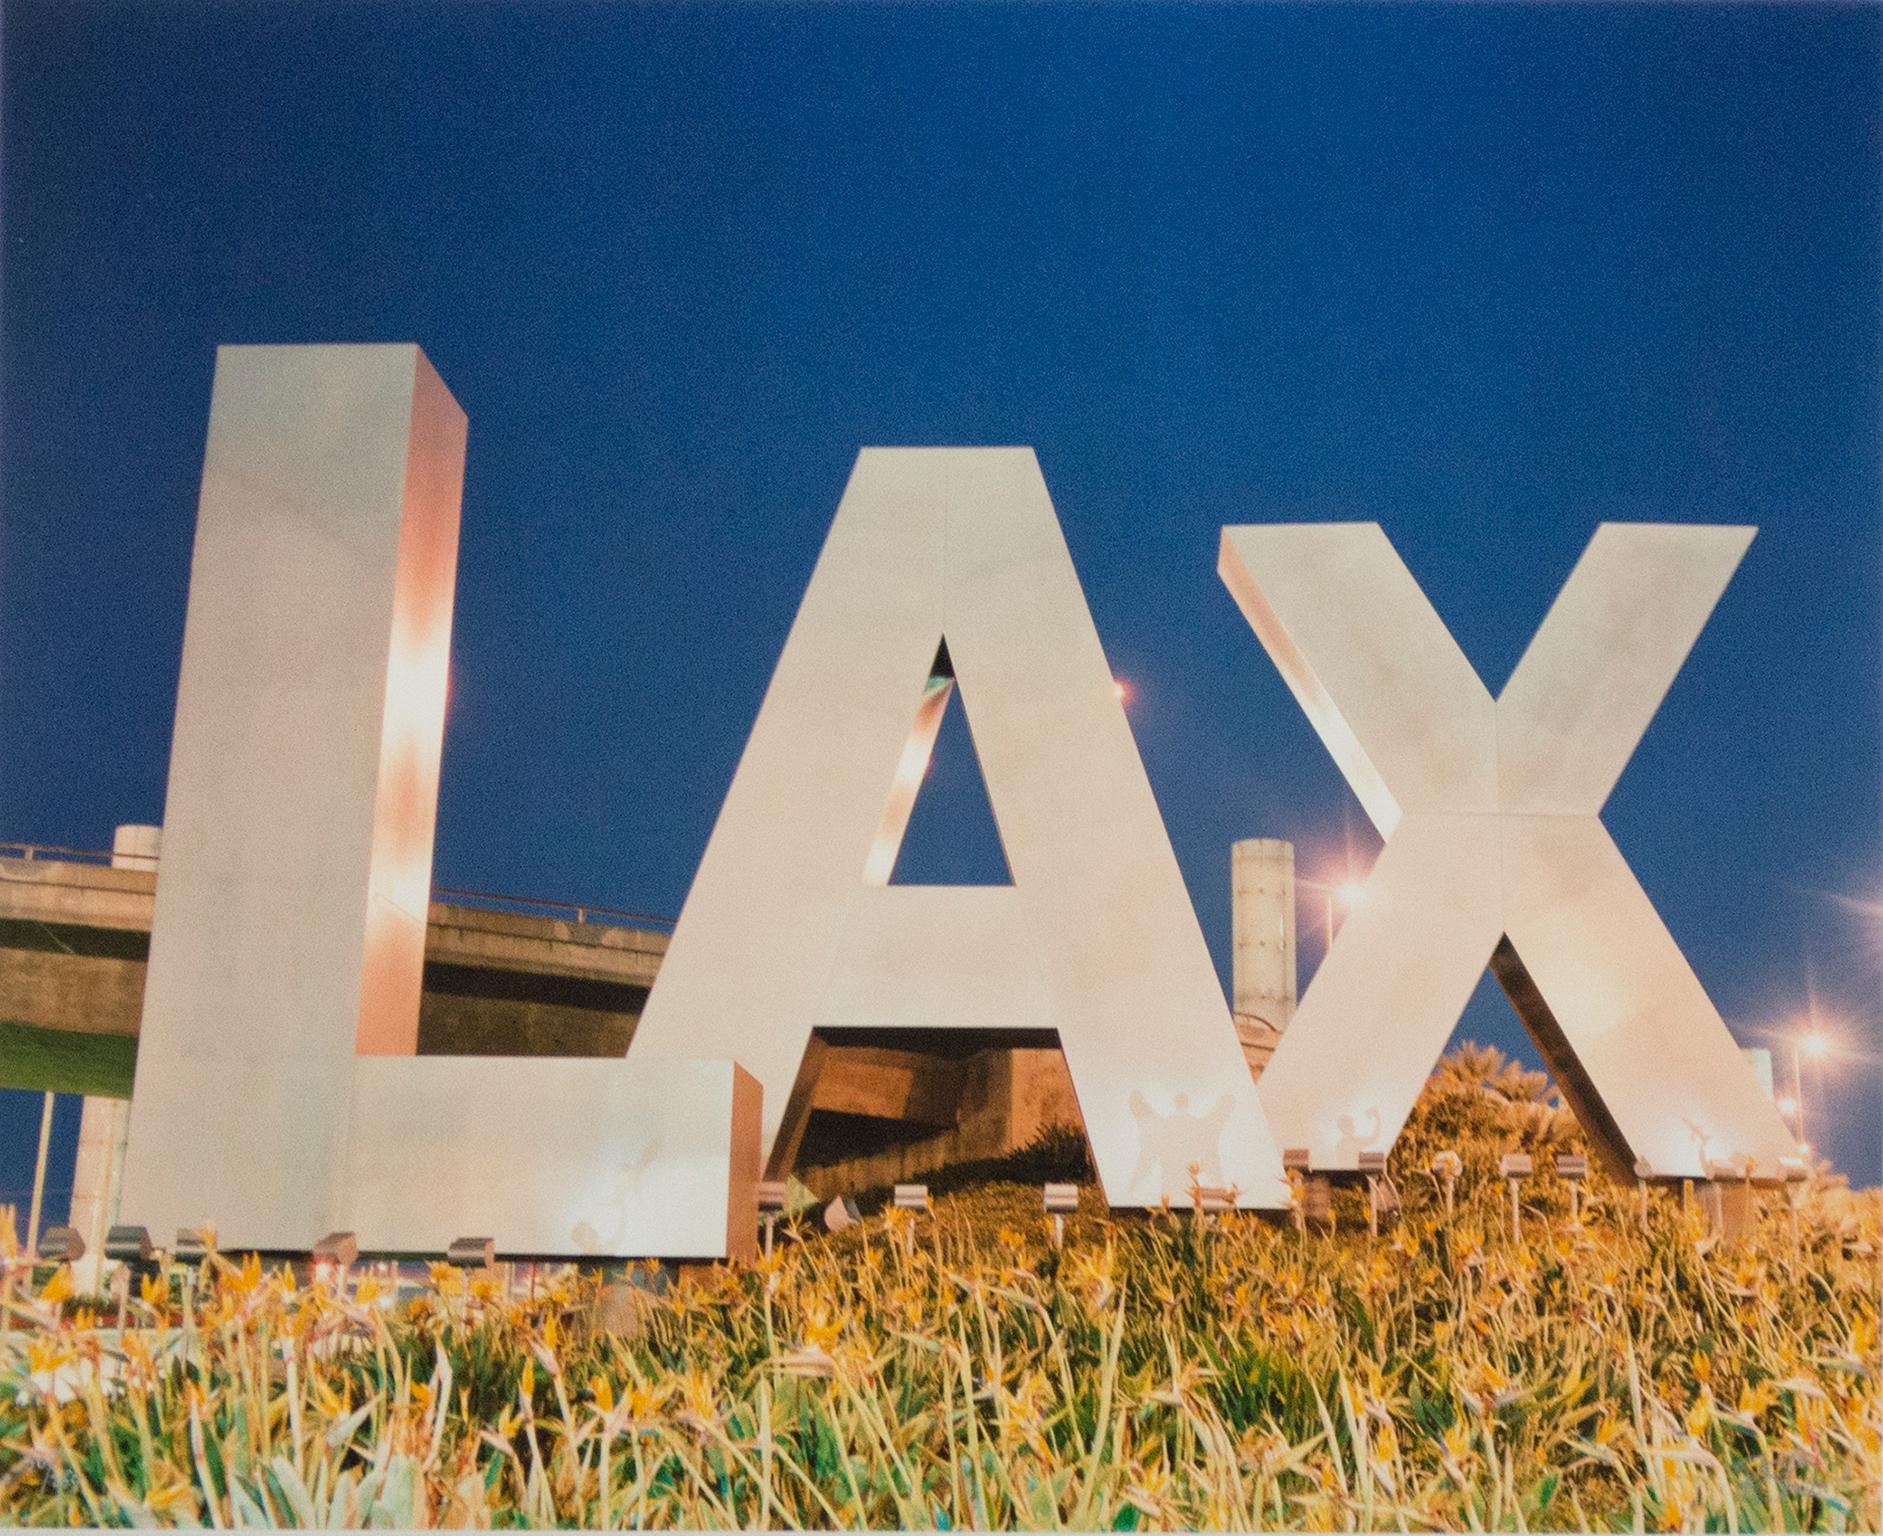 "The History of Flight (Upon the LAX Sign)" is an original fine-art photograph created by Robert Kawika Sheer. The artist signed this piece in the lower right and editioned in the lower left. Edition: 30/250. This piece focuses on the sign at the